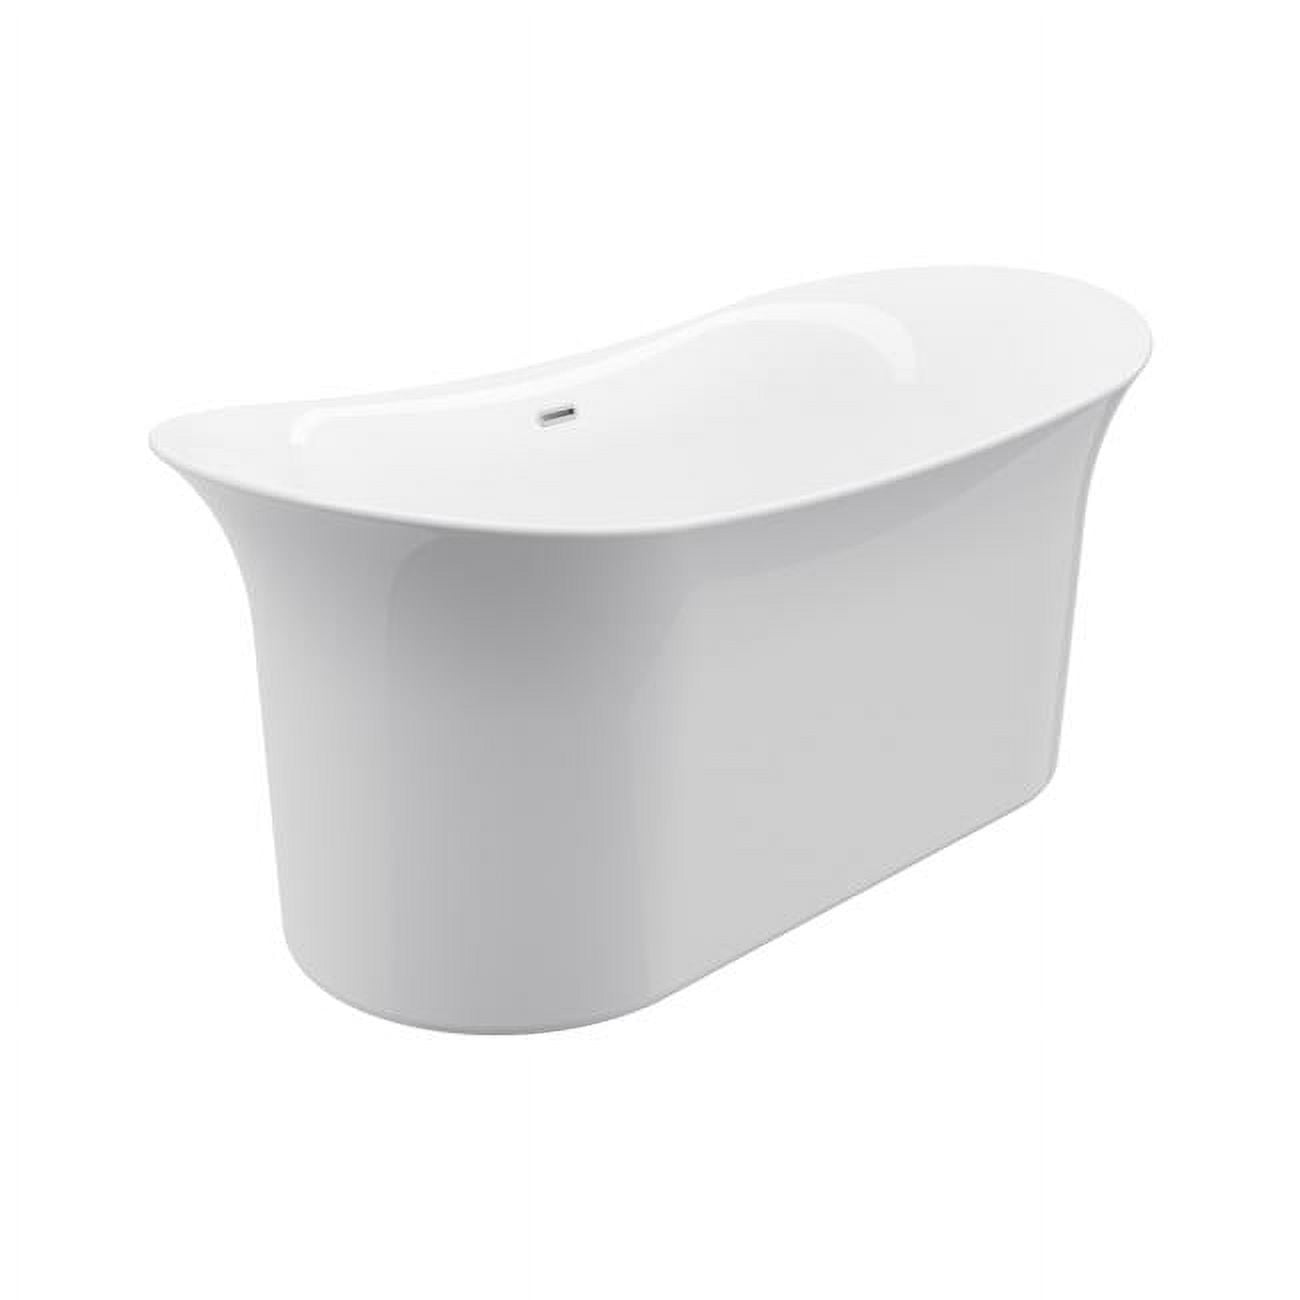 Picture of A&E Bath & Shower BT-1088-WHT 66 in. Cyclone Freestanding Bathtub